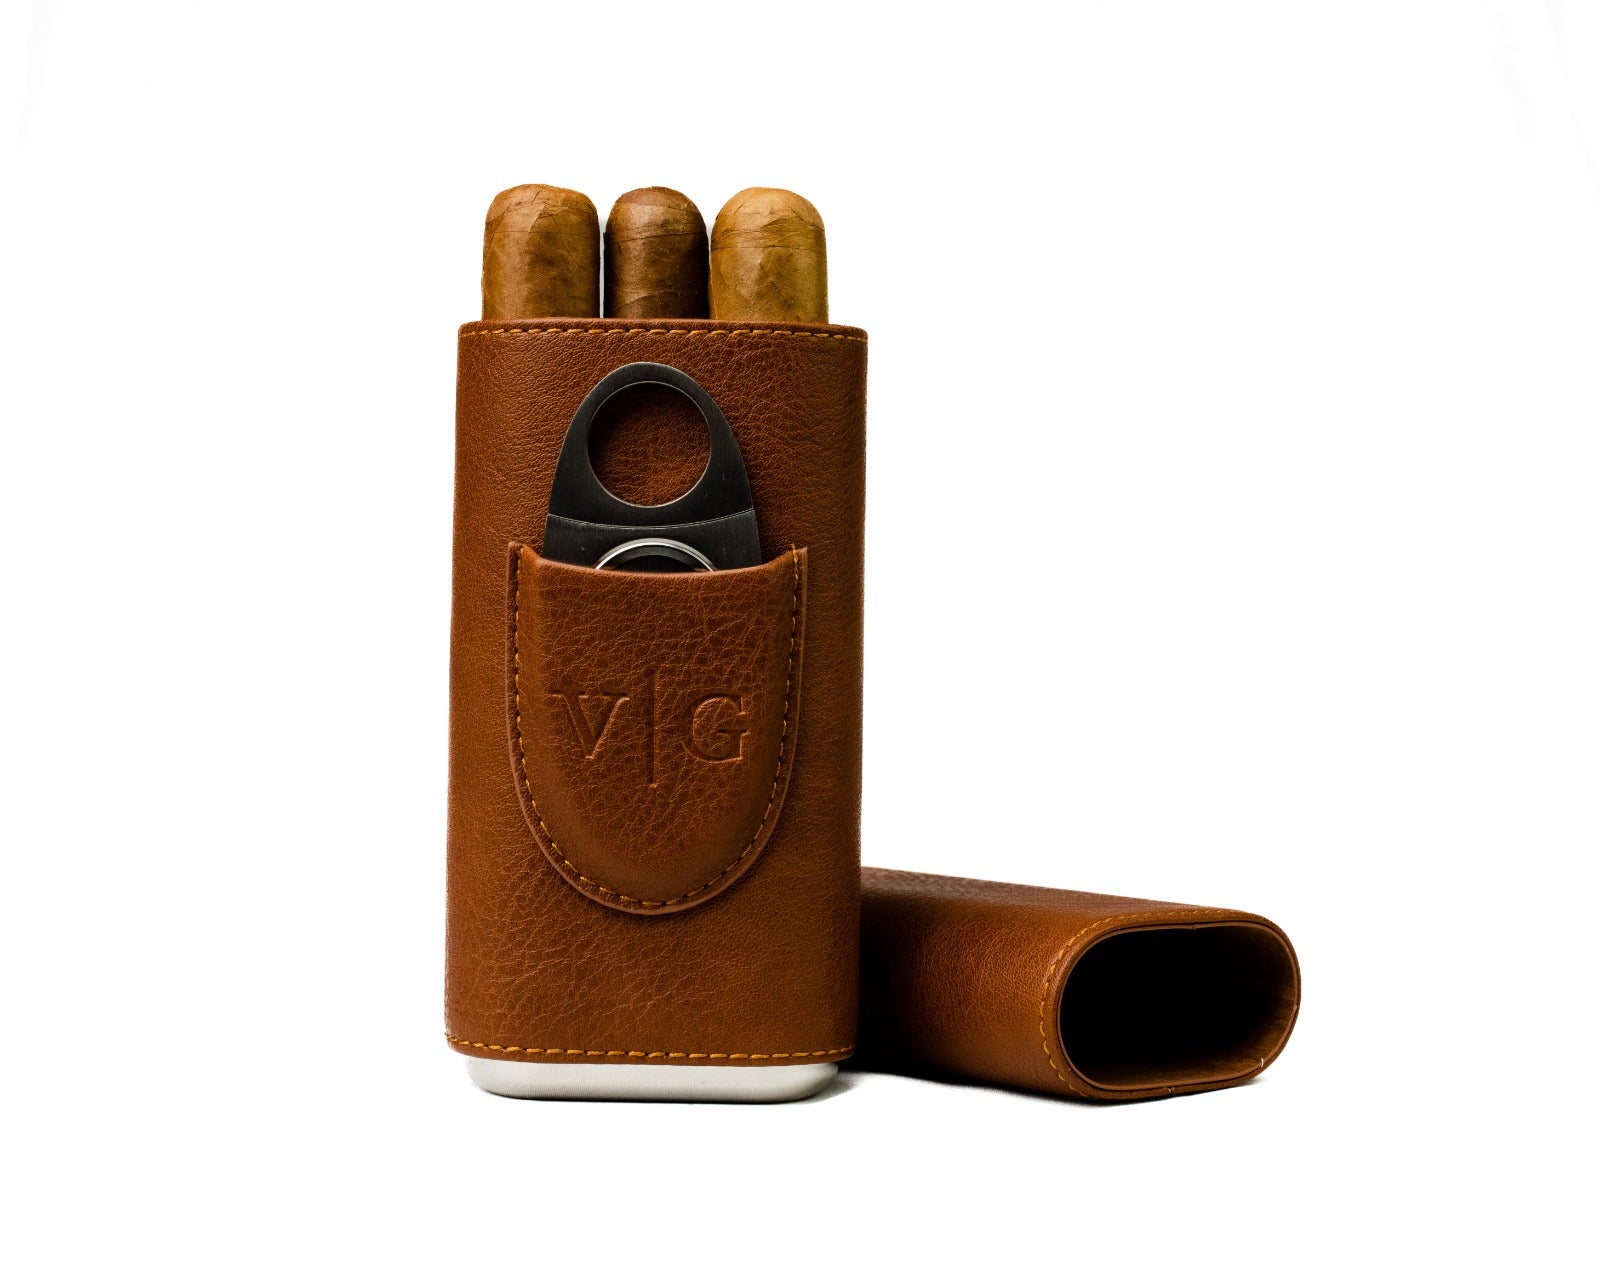 Luxury Brown Leather Cigar Case With Cutter by Vintage Gentlemen